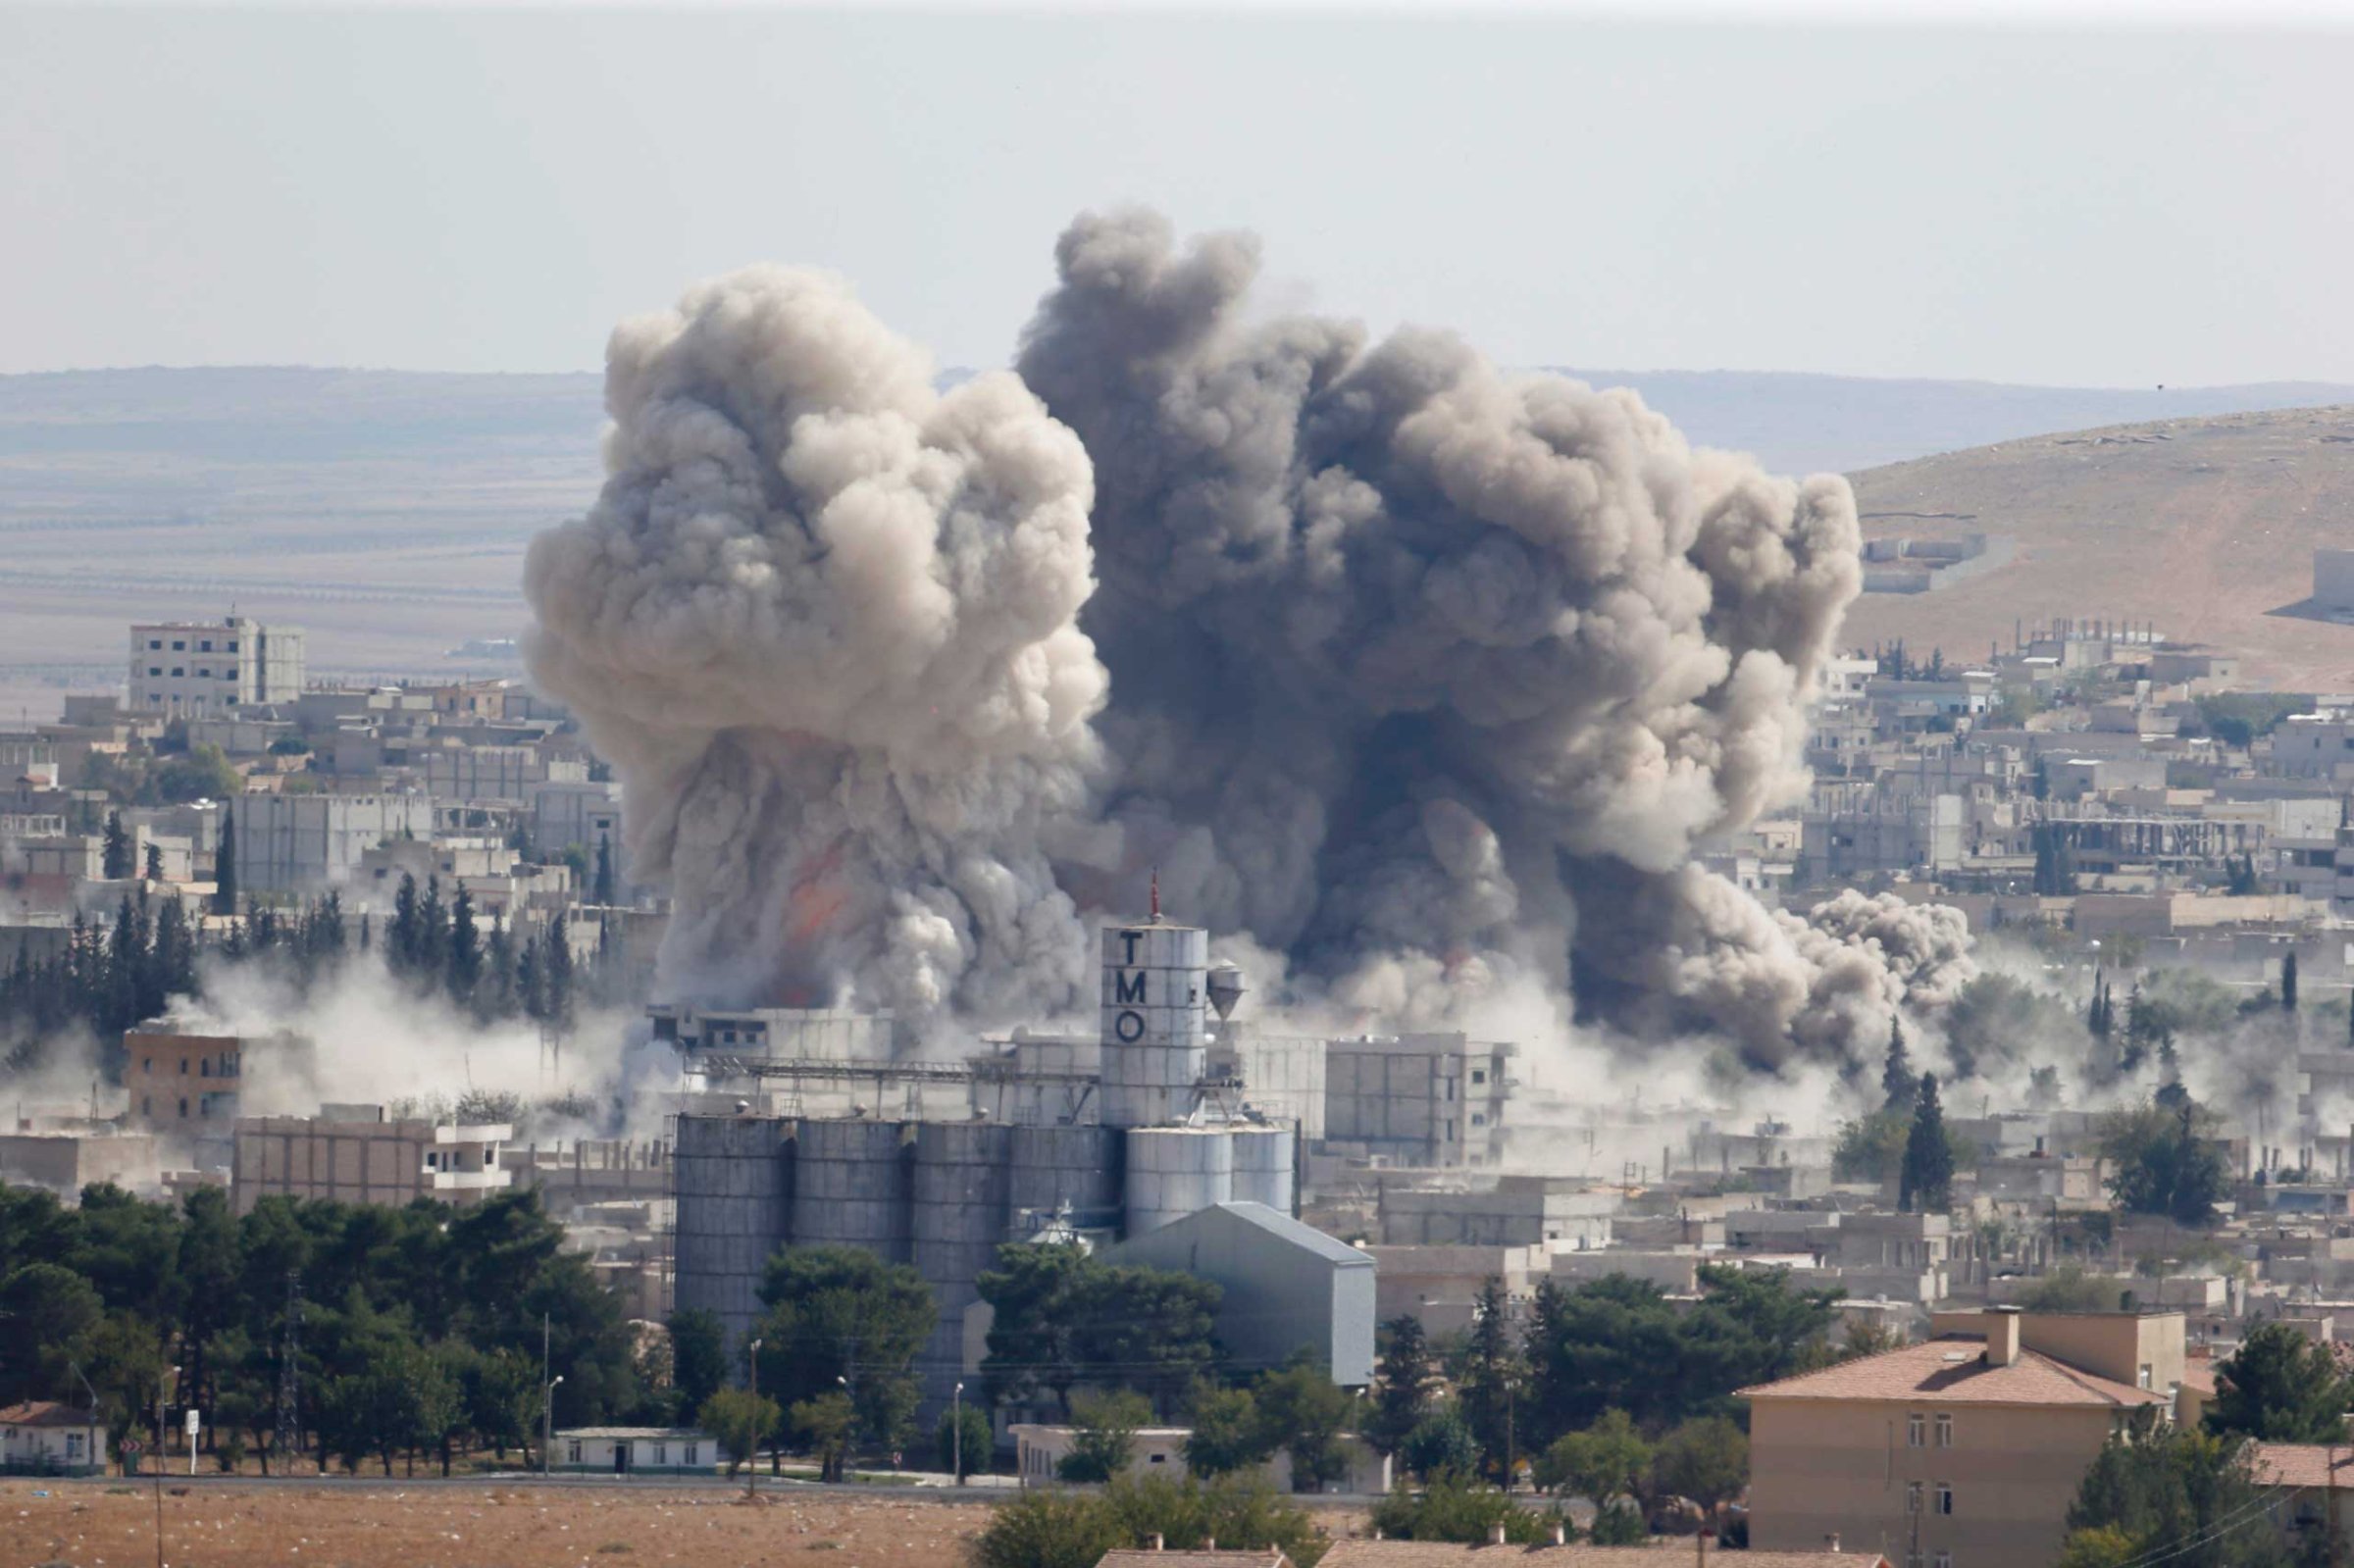 Smoke rises after an U.S.-led air strike in the Syrian town of Kobani, Oct. 8, 2014.